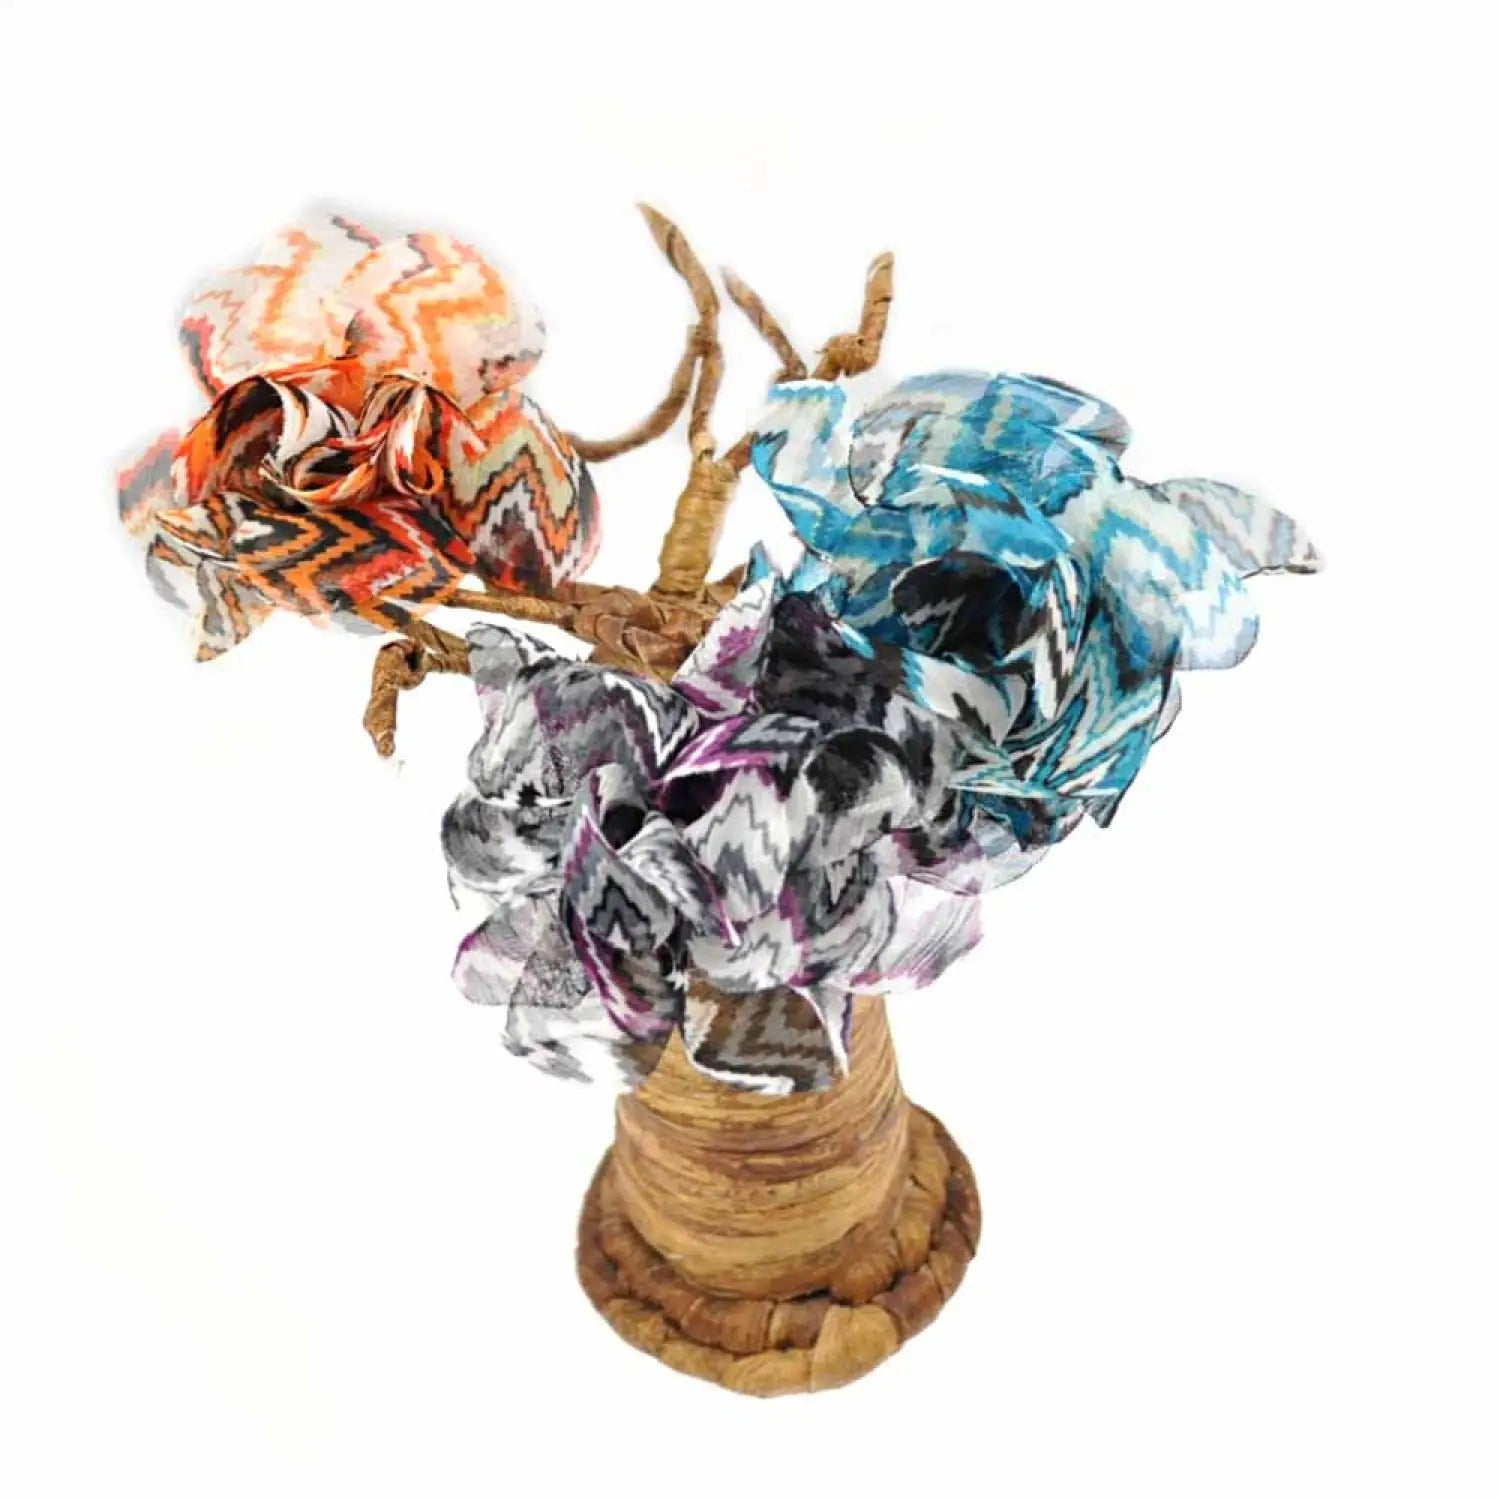 Missoni Print Flower Hair Clip with a vase of flowers in the background